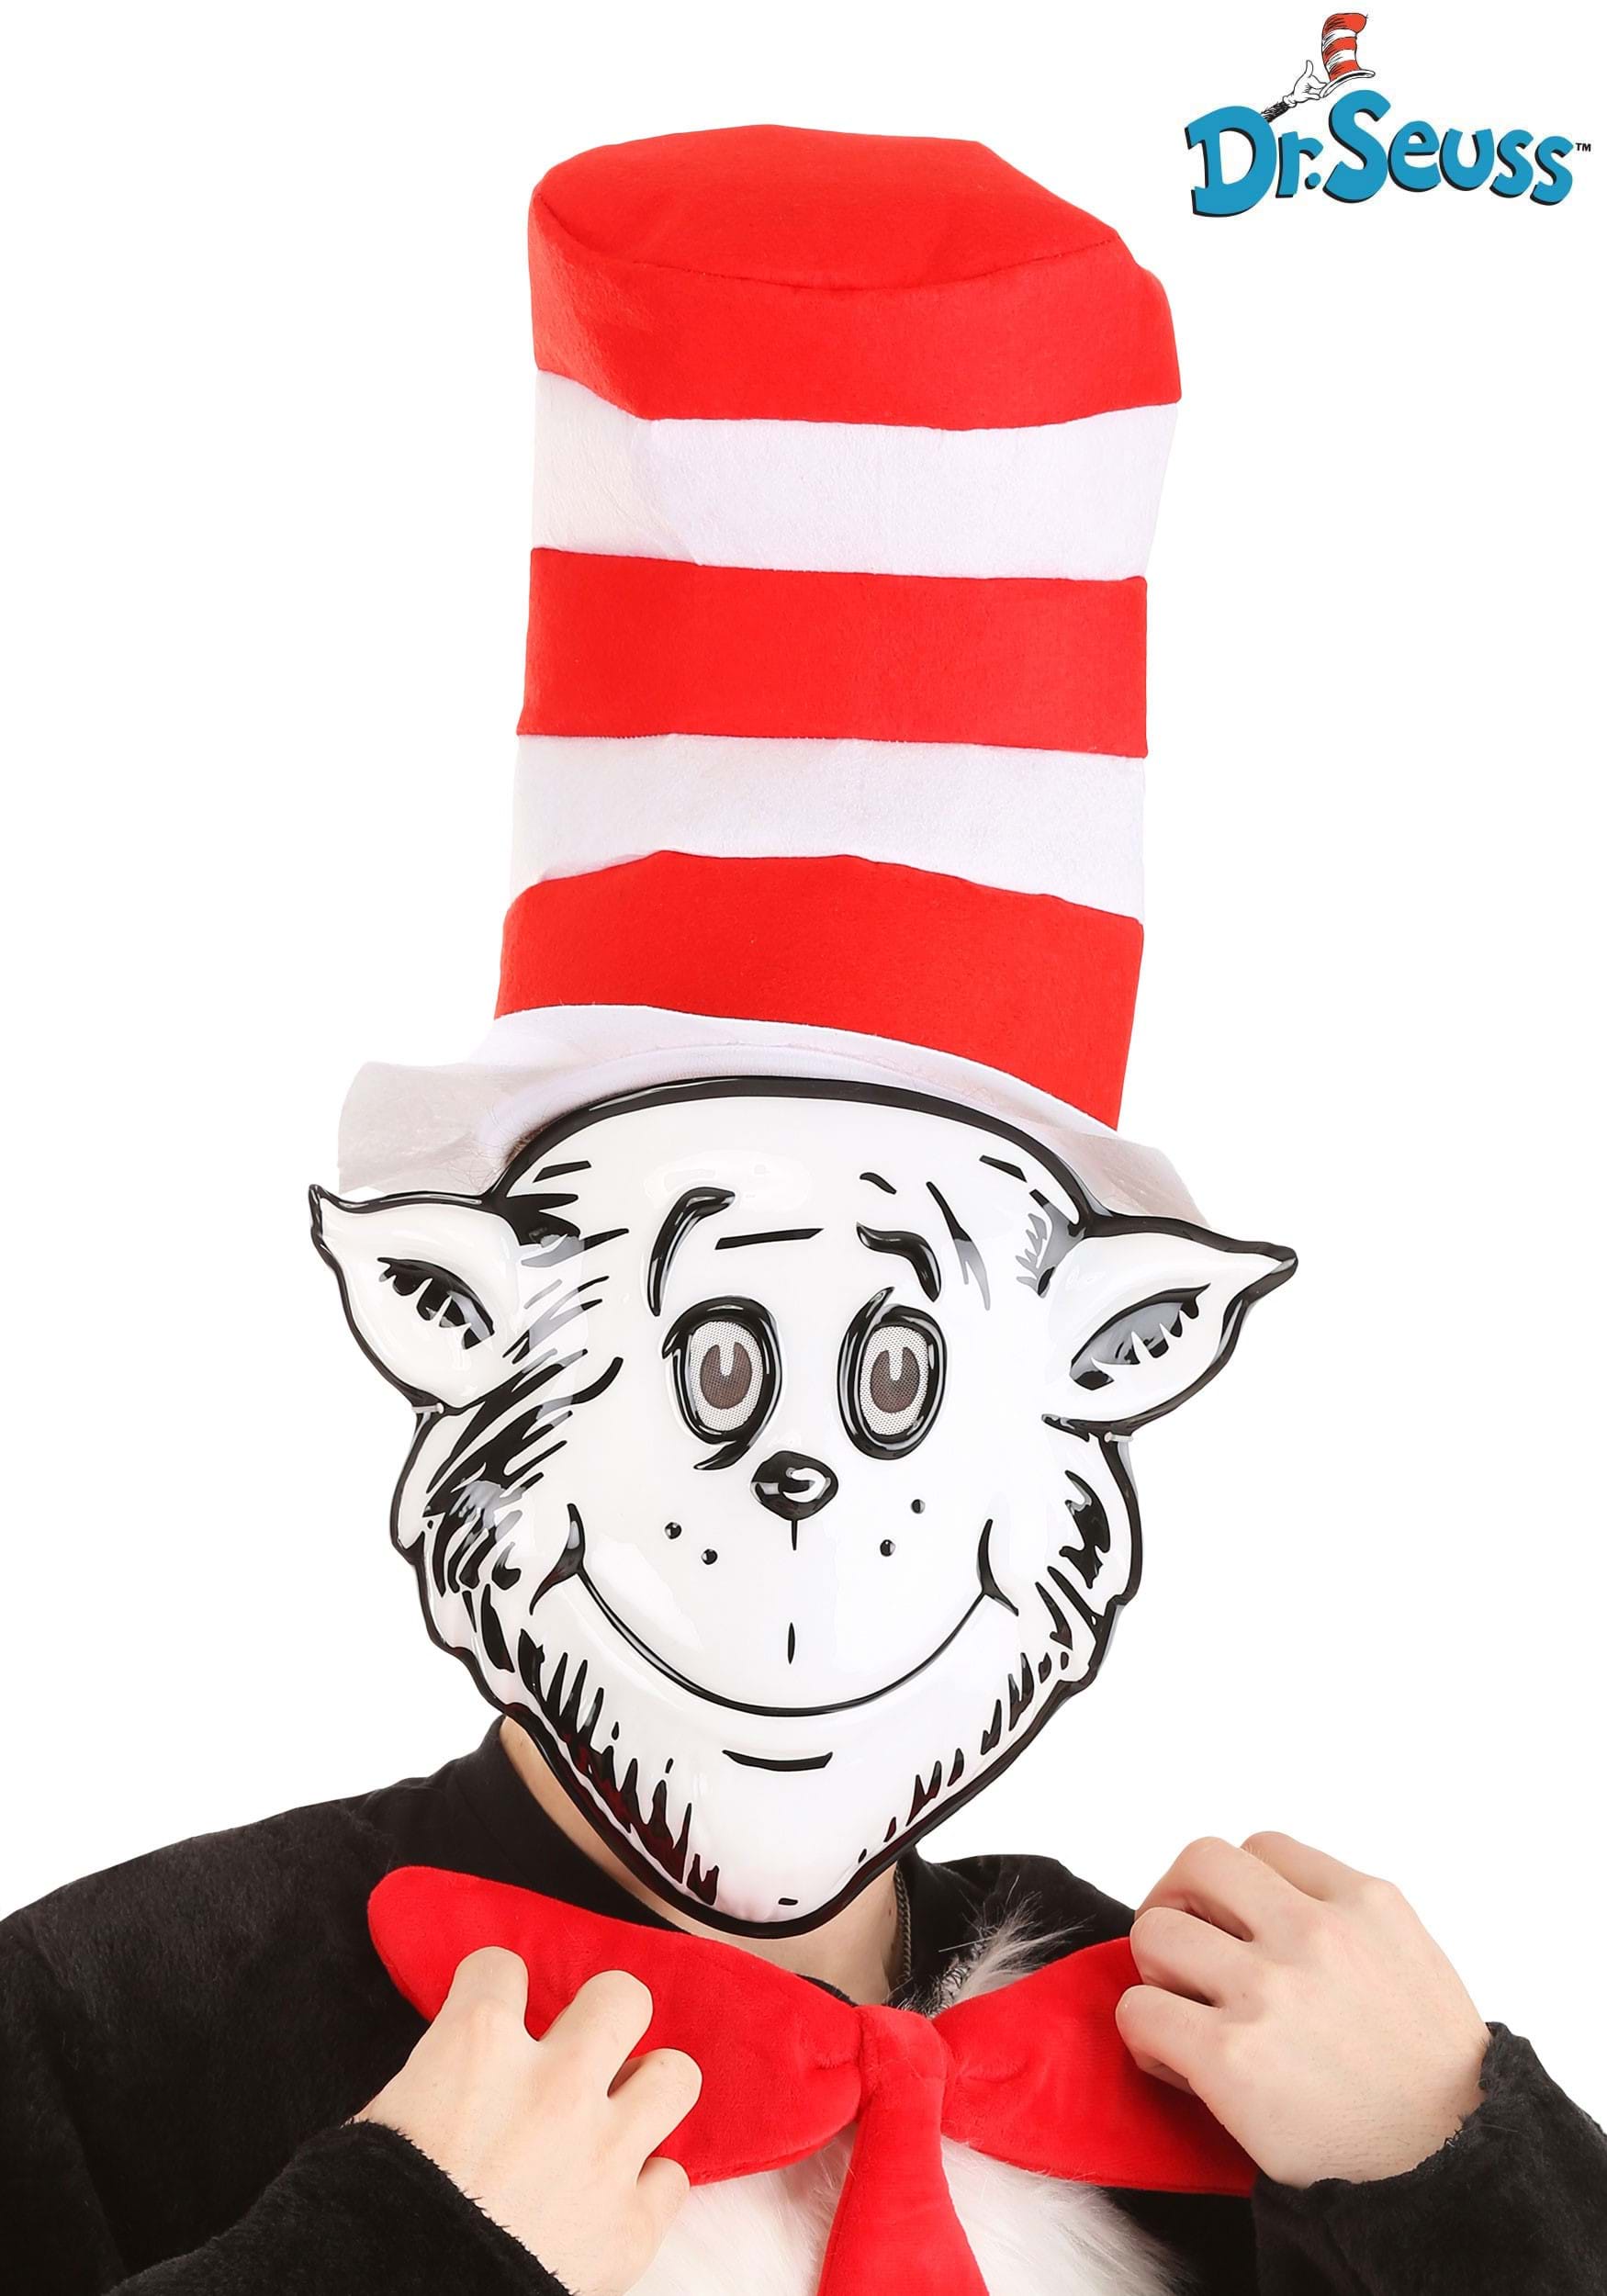 https://images.halloweencostumes.ca/products/71089/1-1/the-cat-in-the-hat-vacuform-mask-hat-kit-1.jpg